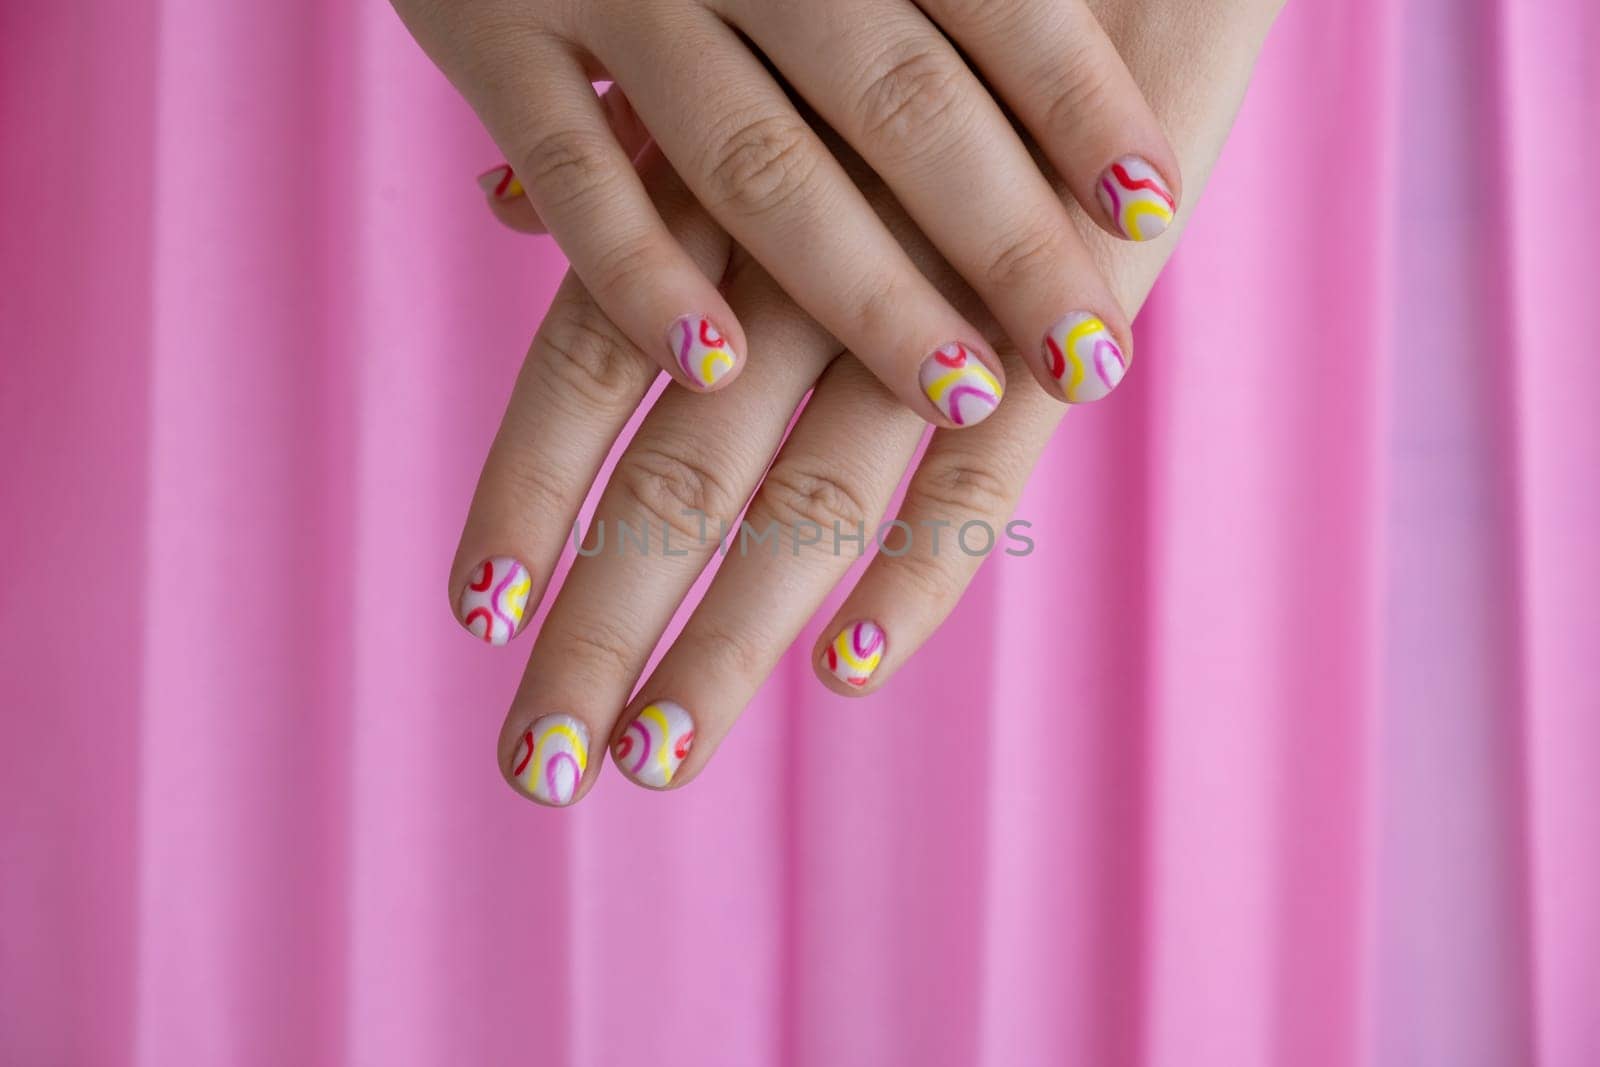 Pastel softness colorful manicured nails on pink background. Woman showing her new summer manicure in colors of pastel palette. Simplicity decor fresh spring vibes earth-colored neutral tones by anna_stasiia